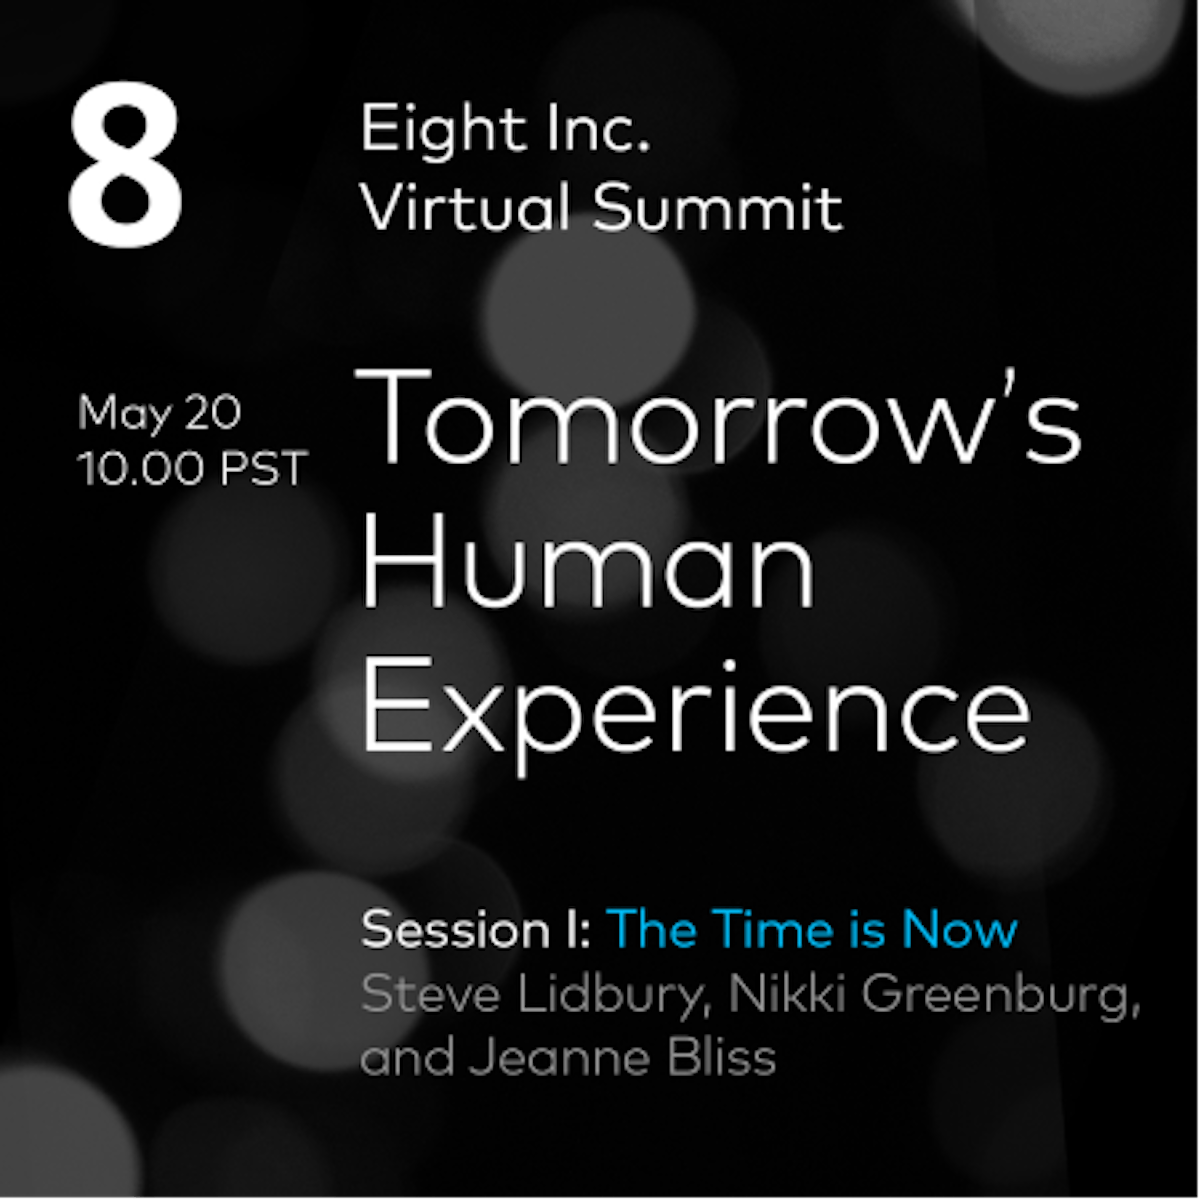 Tomorrow’s Human Experience: The Time is Now